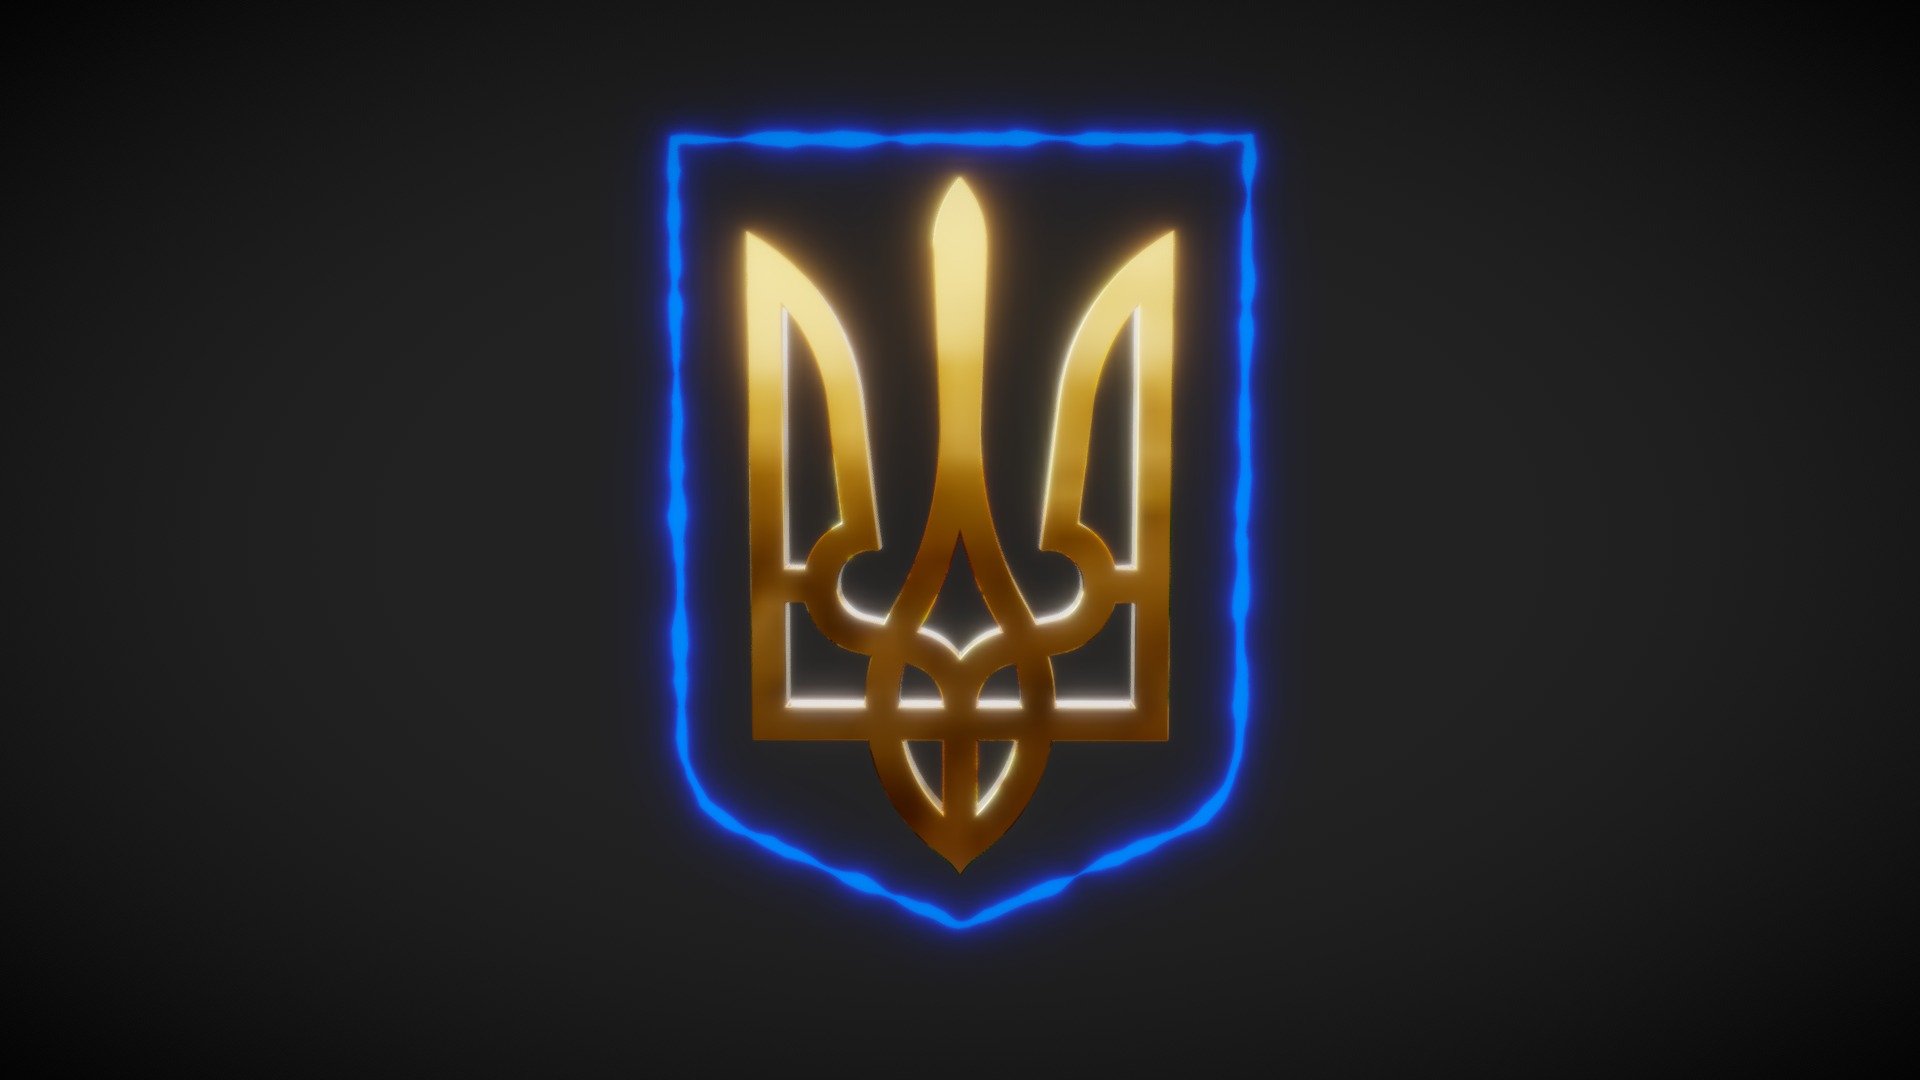 Trident – Emblem of Ukraine.
February 19 - Day of the State Emblem of Ukraine - Trident of Ukraine - Download Free 3D model by cbuhh 3d model